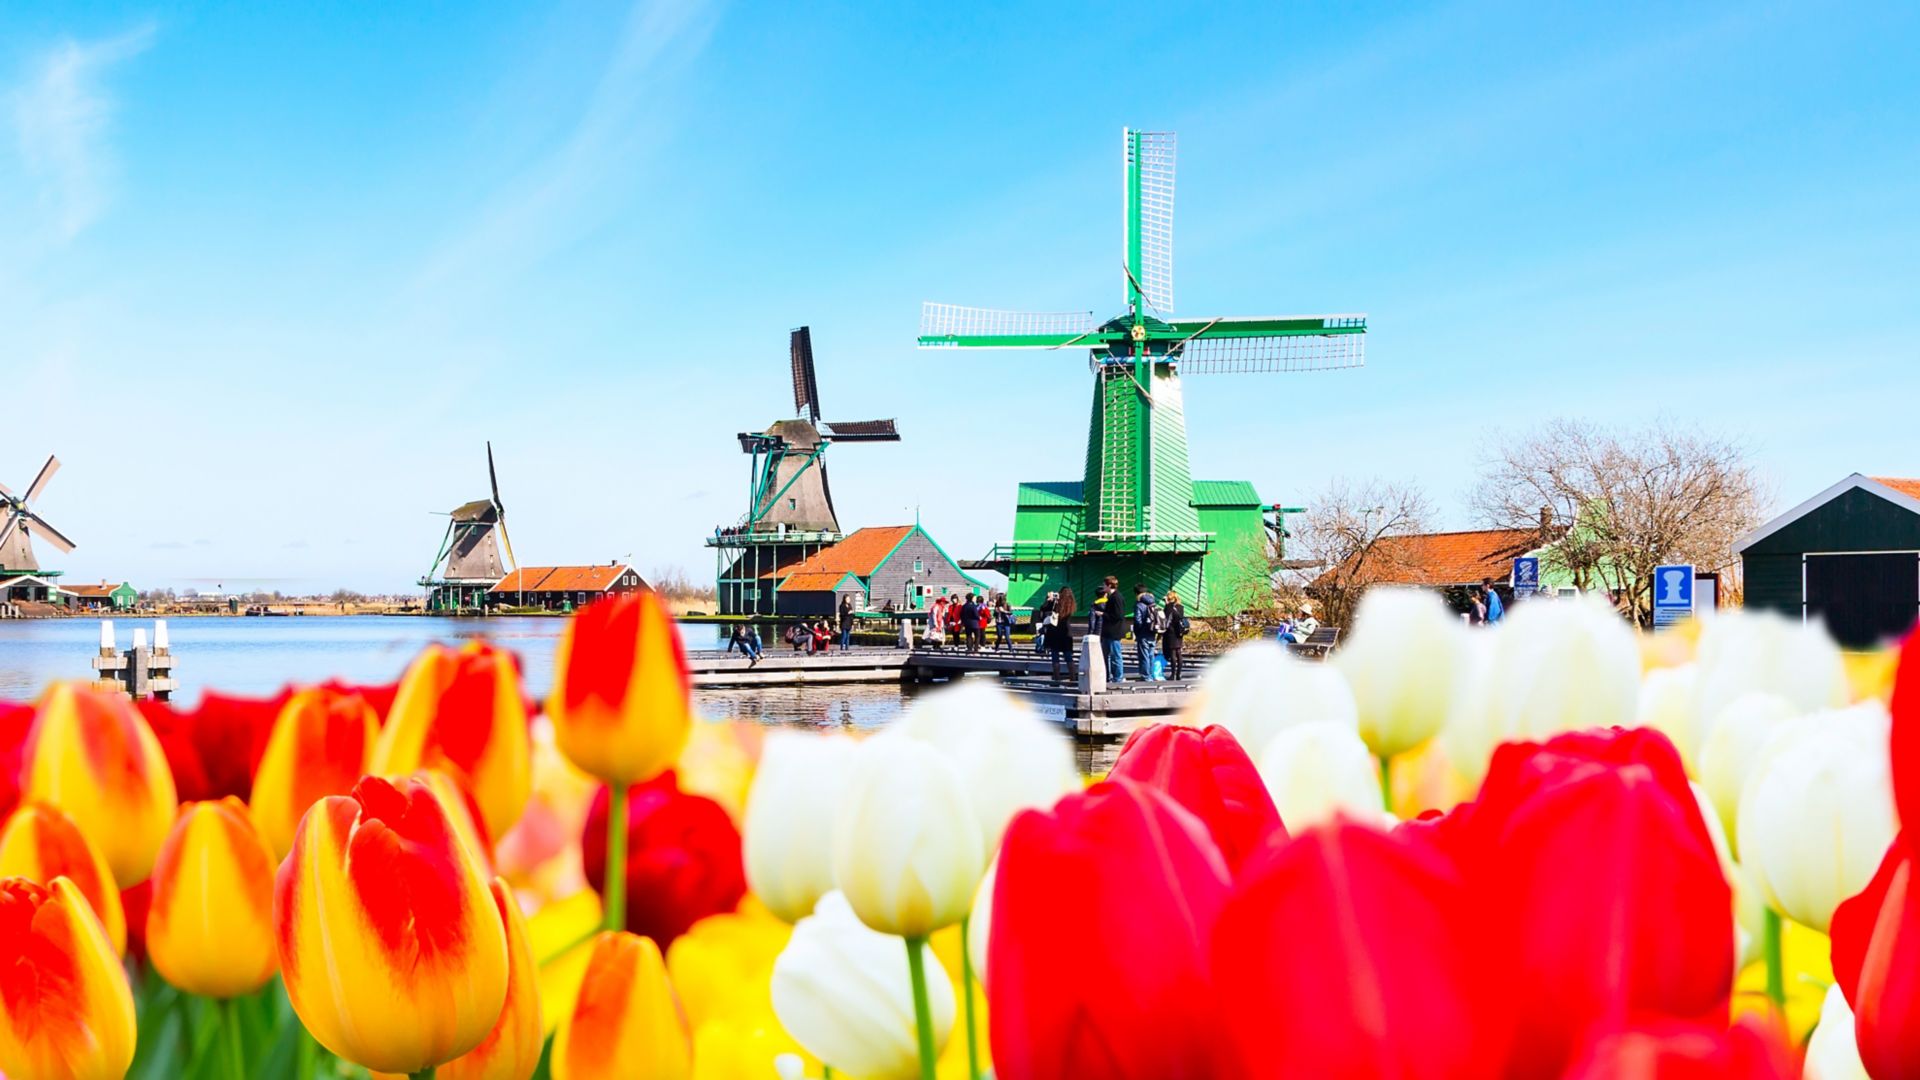 Holland background panoramic banner with tulips and green windmill in traditional village